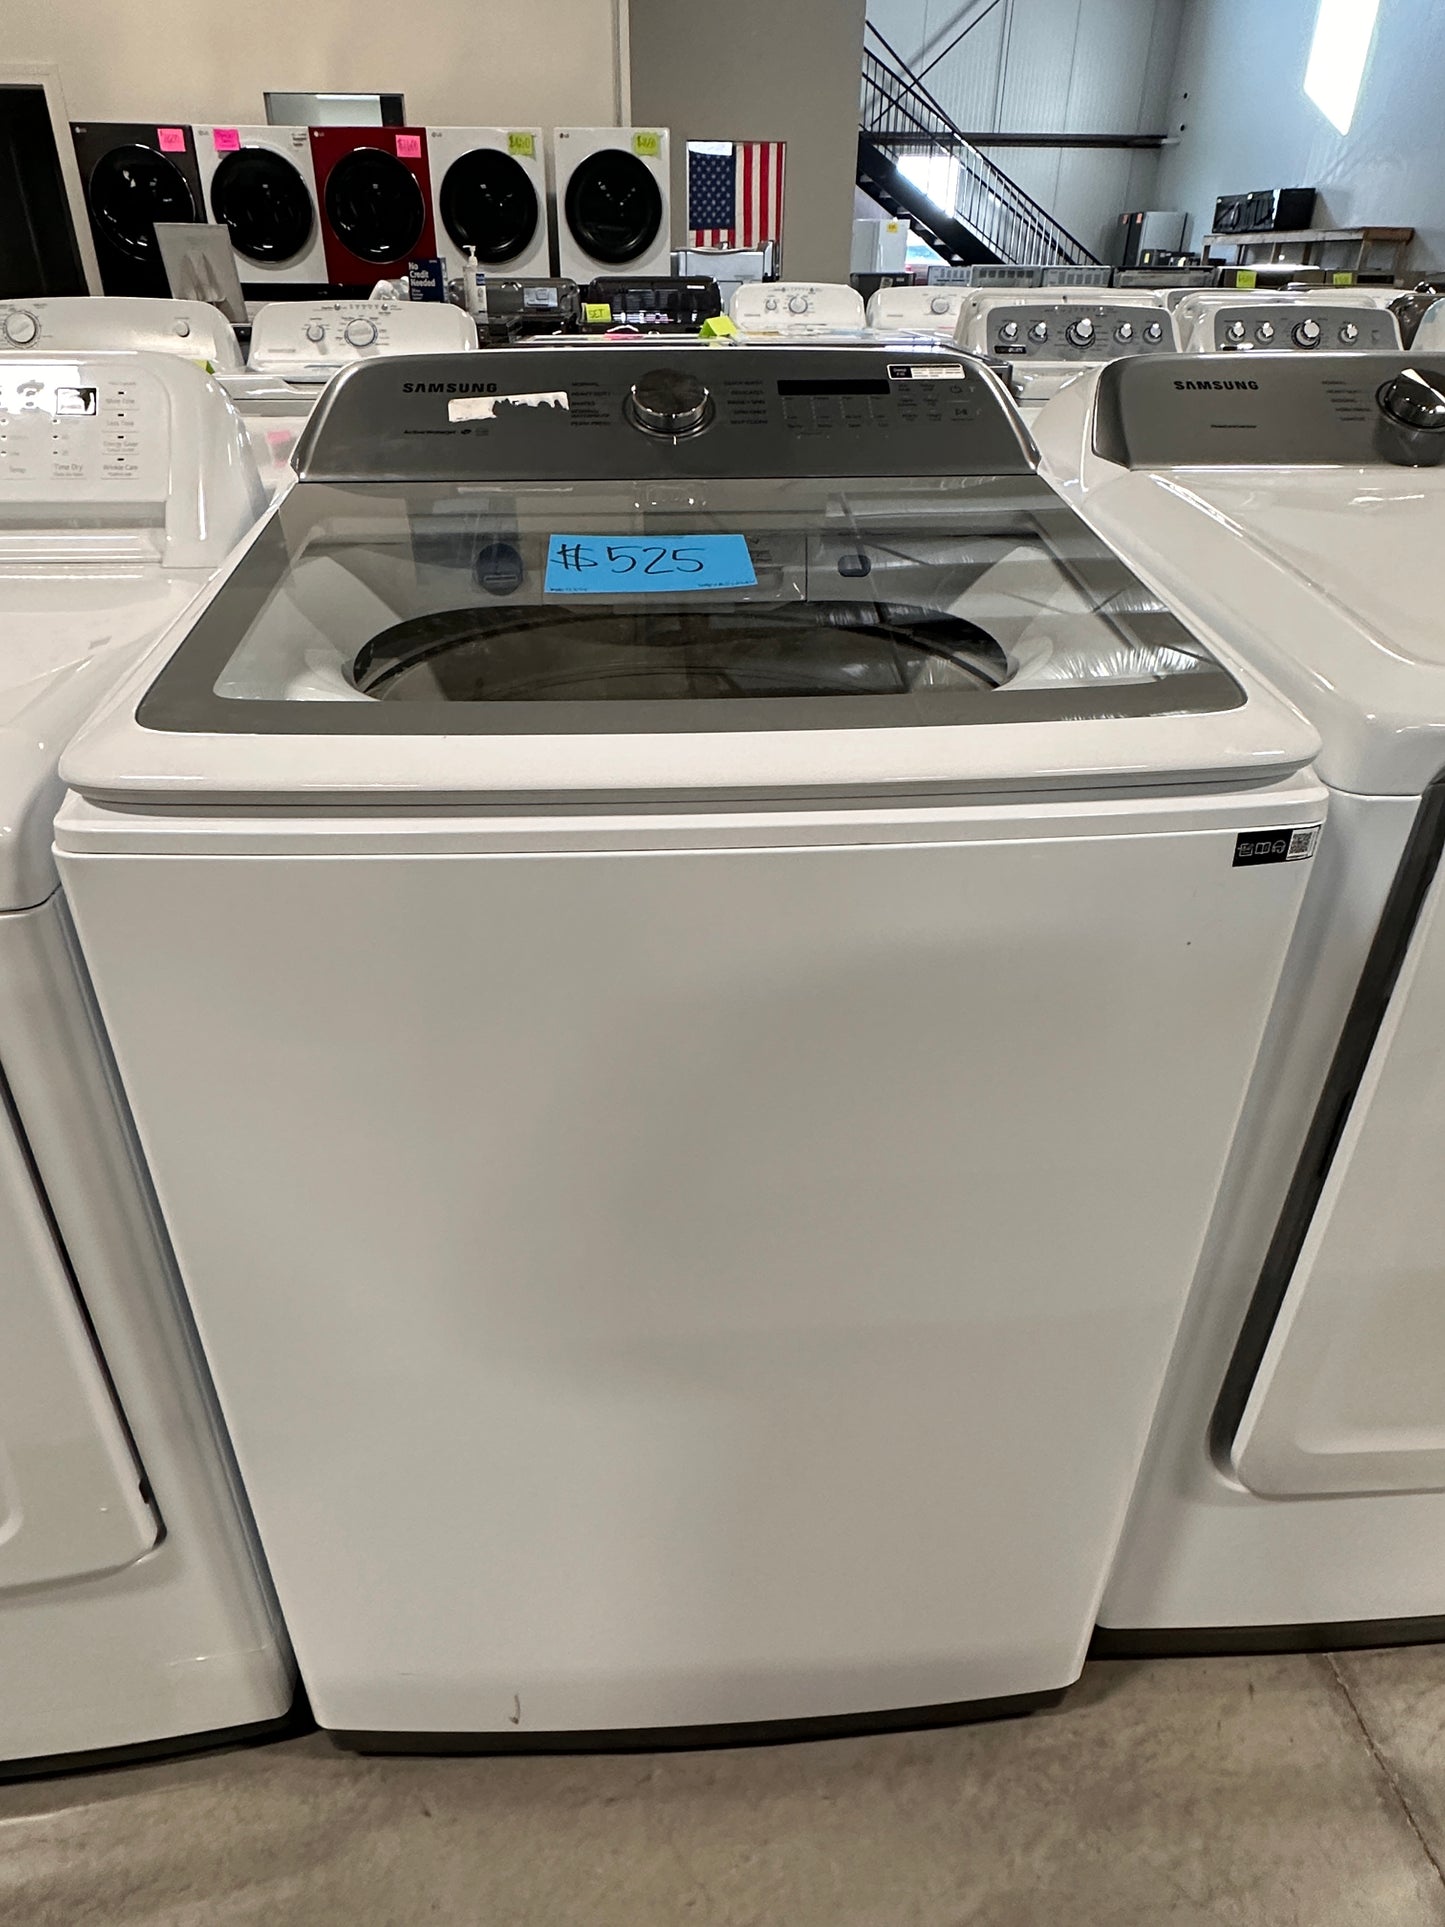 NEW SAMSUNG TOP LOAD WASHER - WAS12824